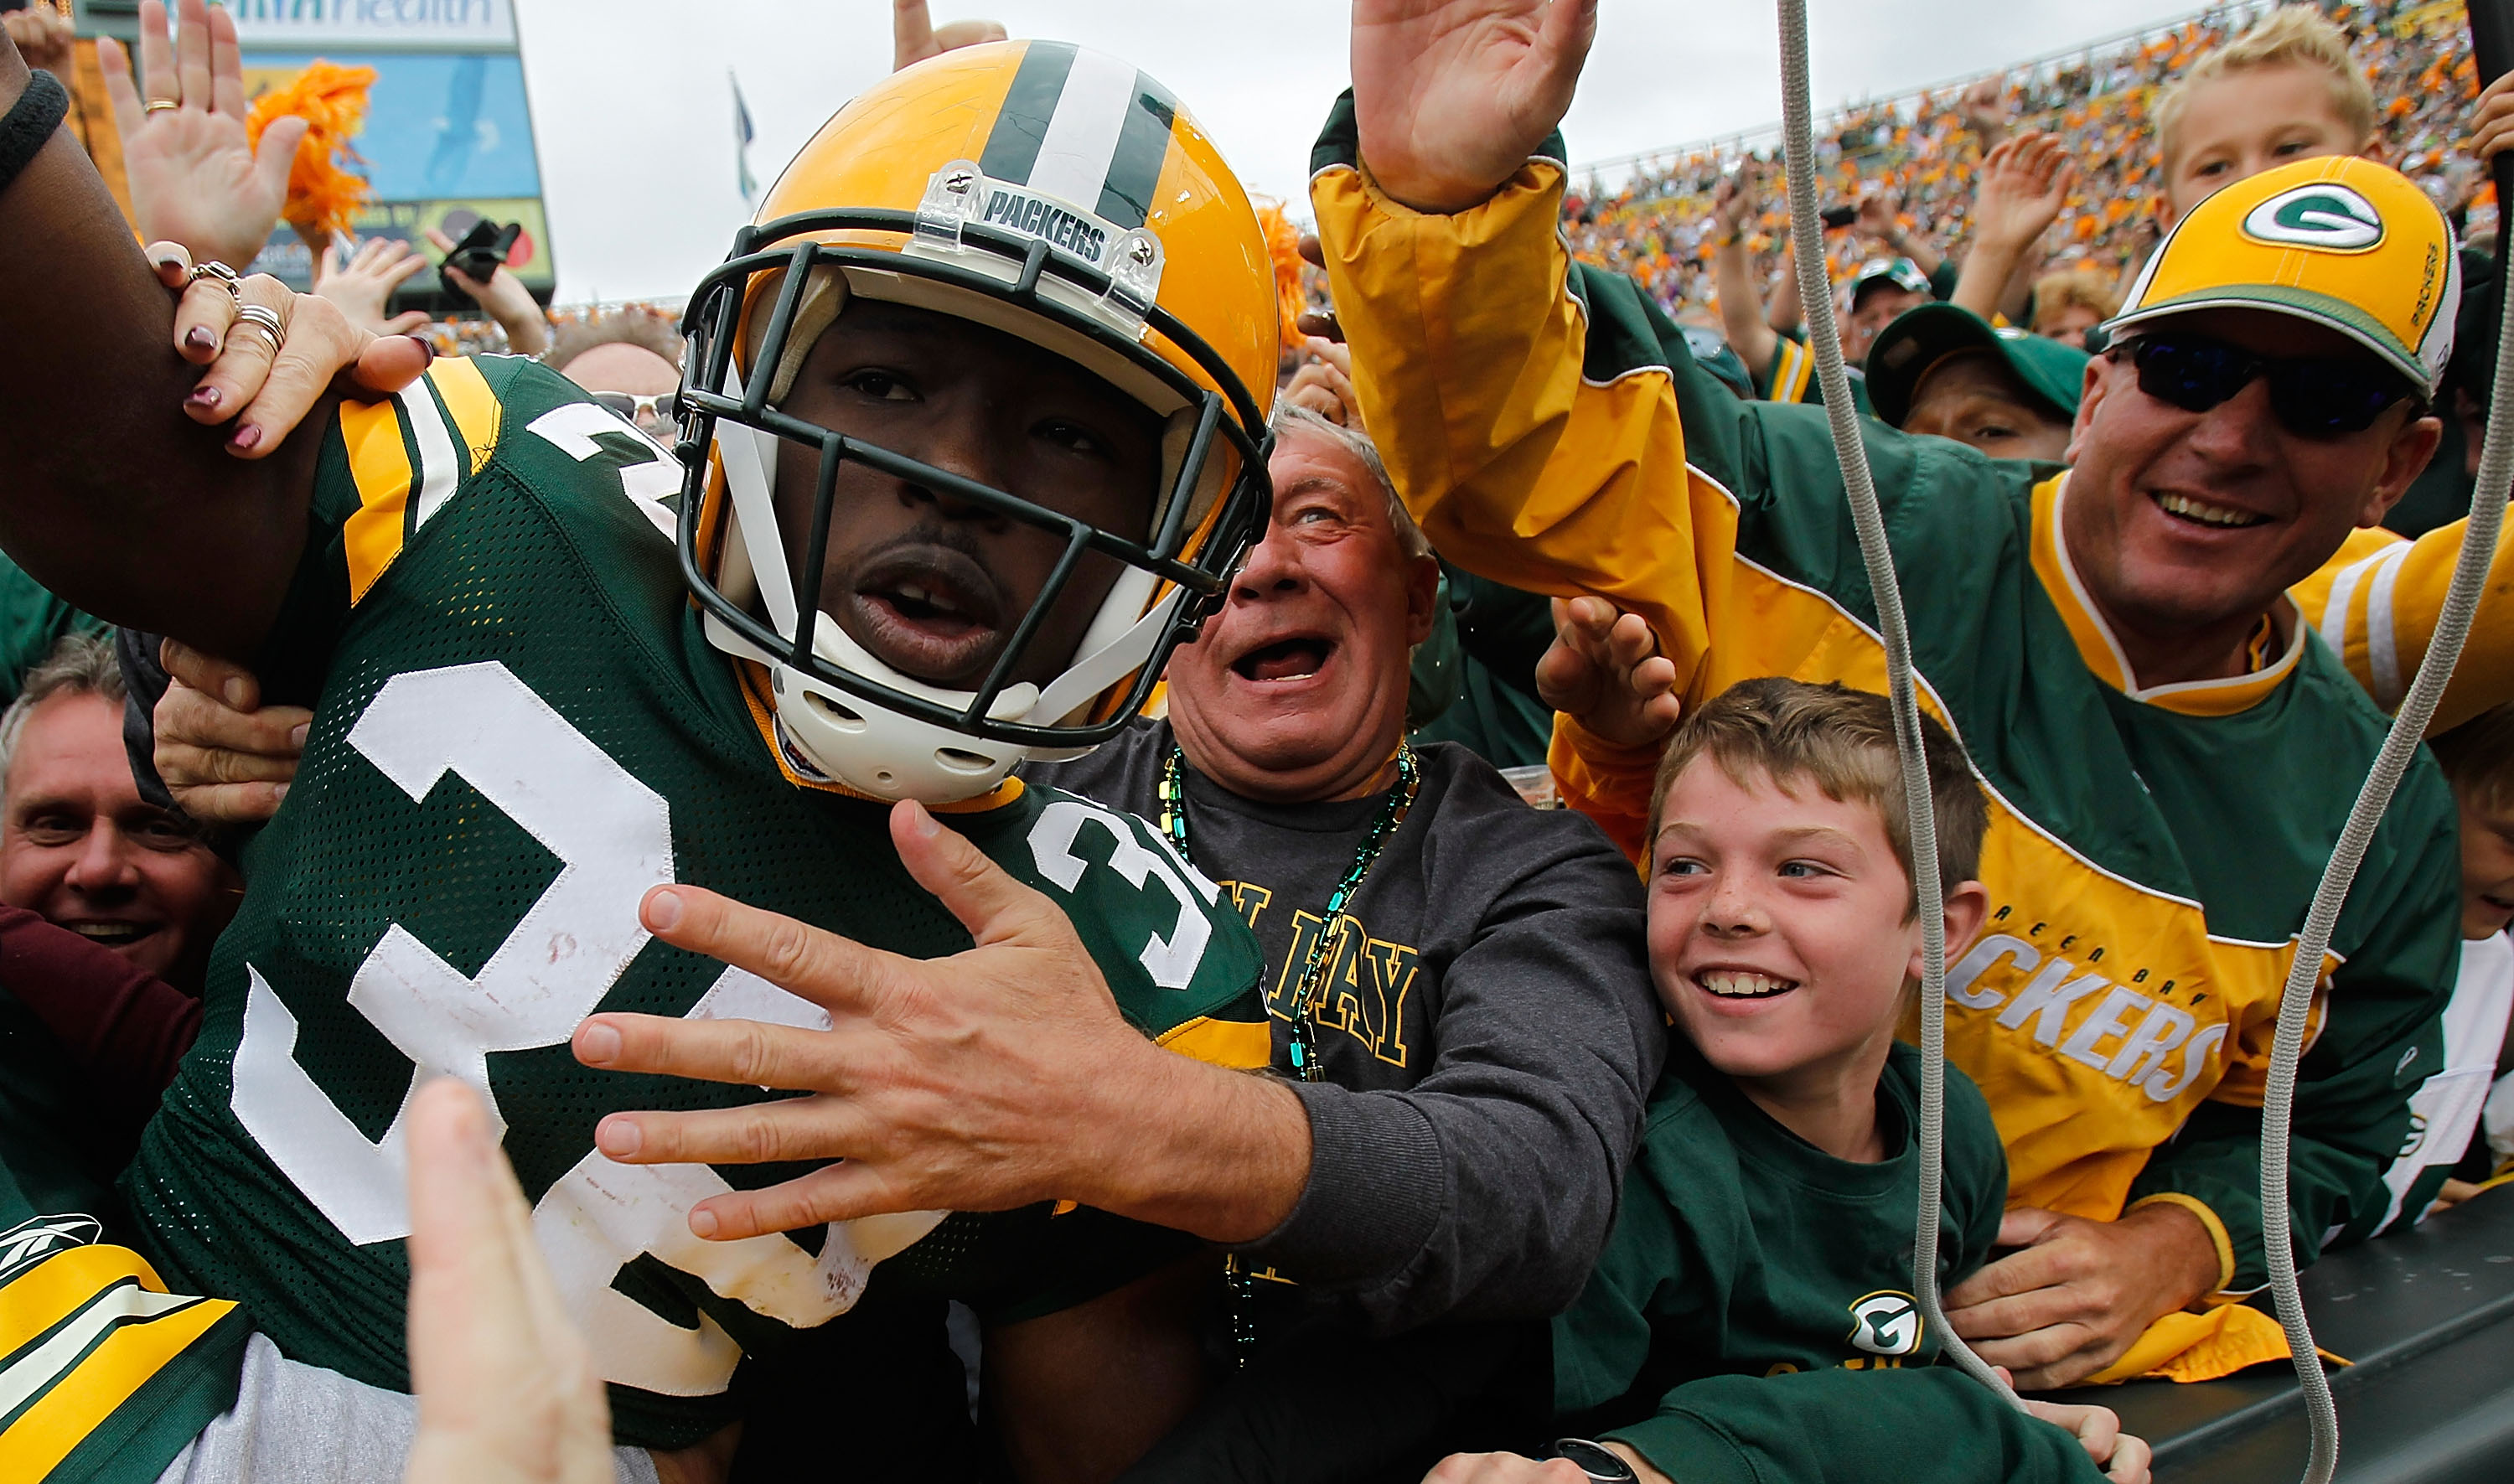 GREEN BAY, WI - SEPTEMBER 19: Brandon Jackson #32 of the Green Bay Packers celebrates a touchdown with a 'Lambeau Leap' into the stands against of the Buffalo Bills at Lambeau Field on September 19, 2010 in Green Bay, Wisconsin. (Photo by Jonathan Daniel/